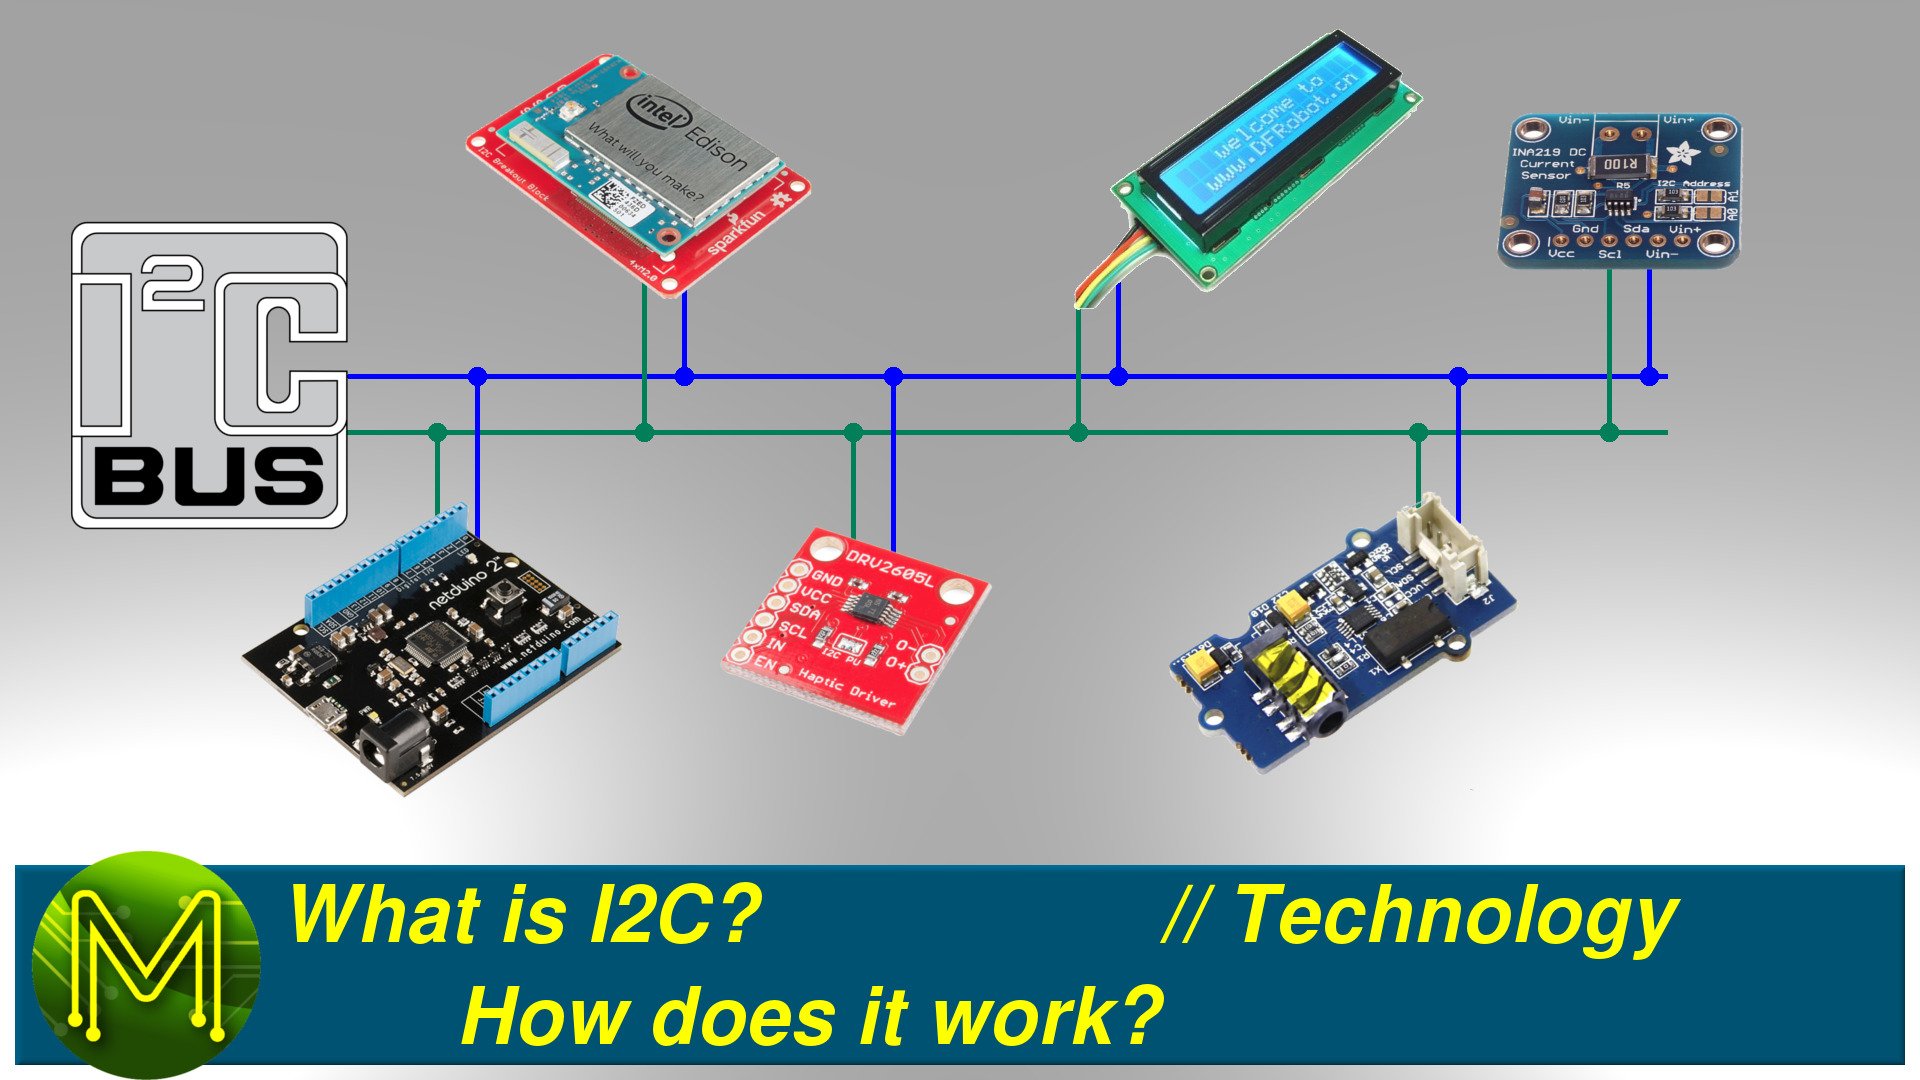 What is I2C? How does it work? // Technology